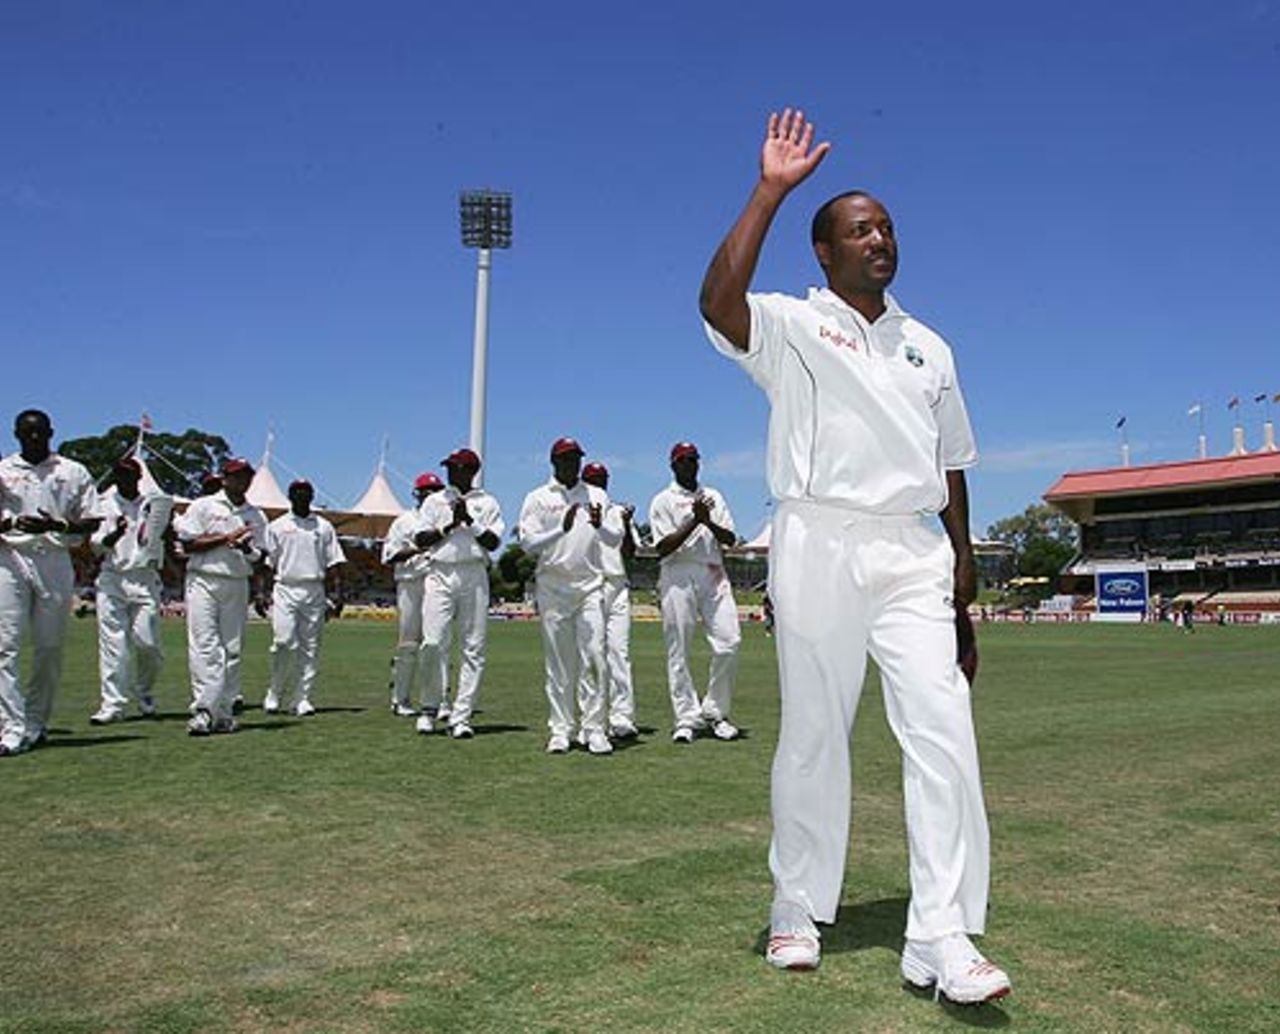 Brian Lara bids farewell to the fans at Adelaide, 3rd Test, Adelaide, 5th day, November 29, 2005